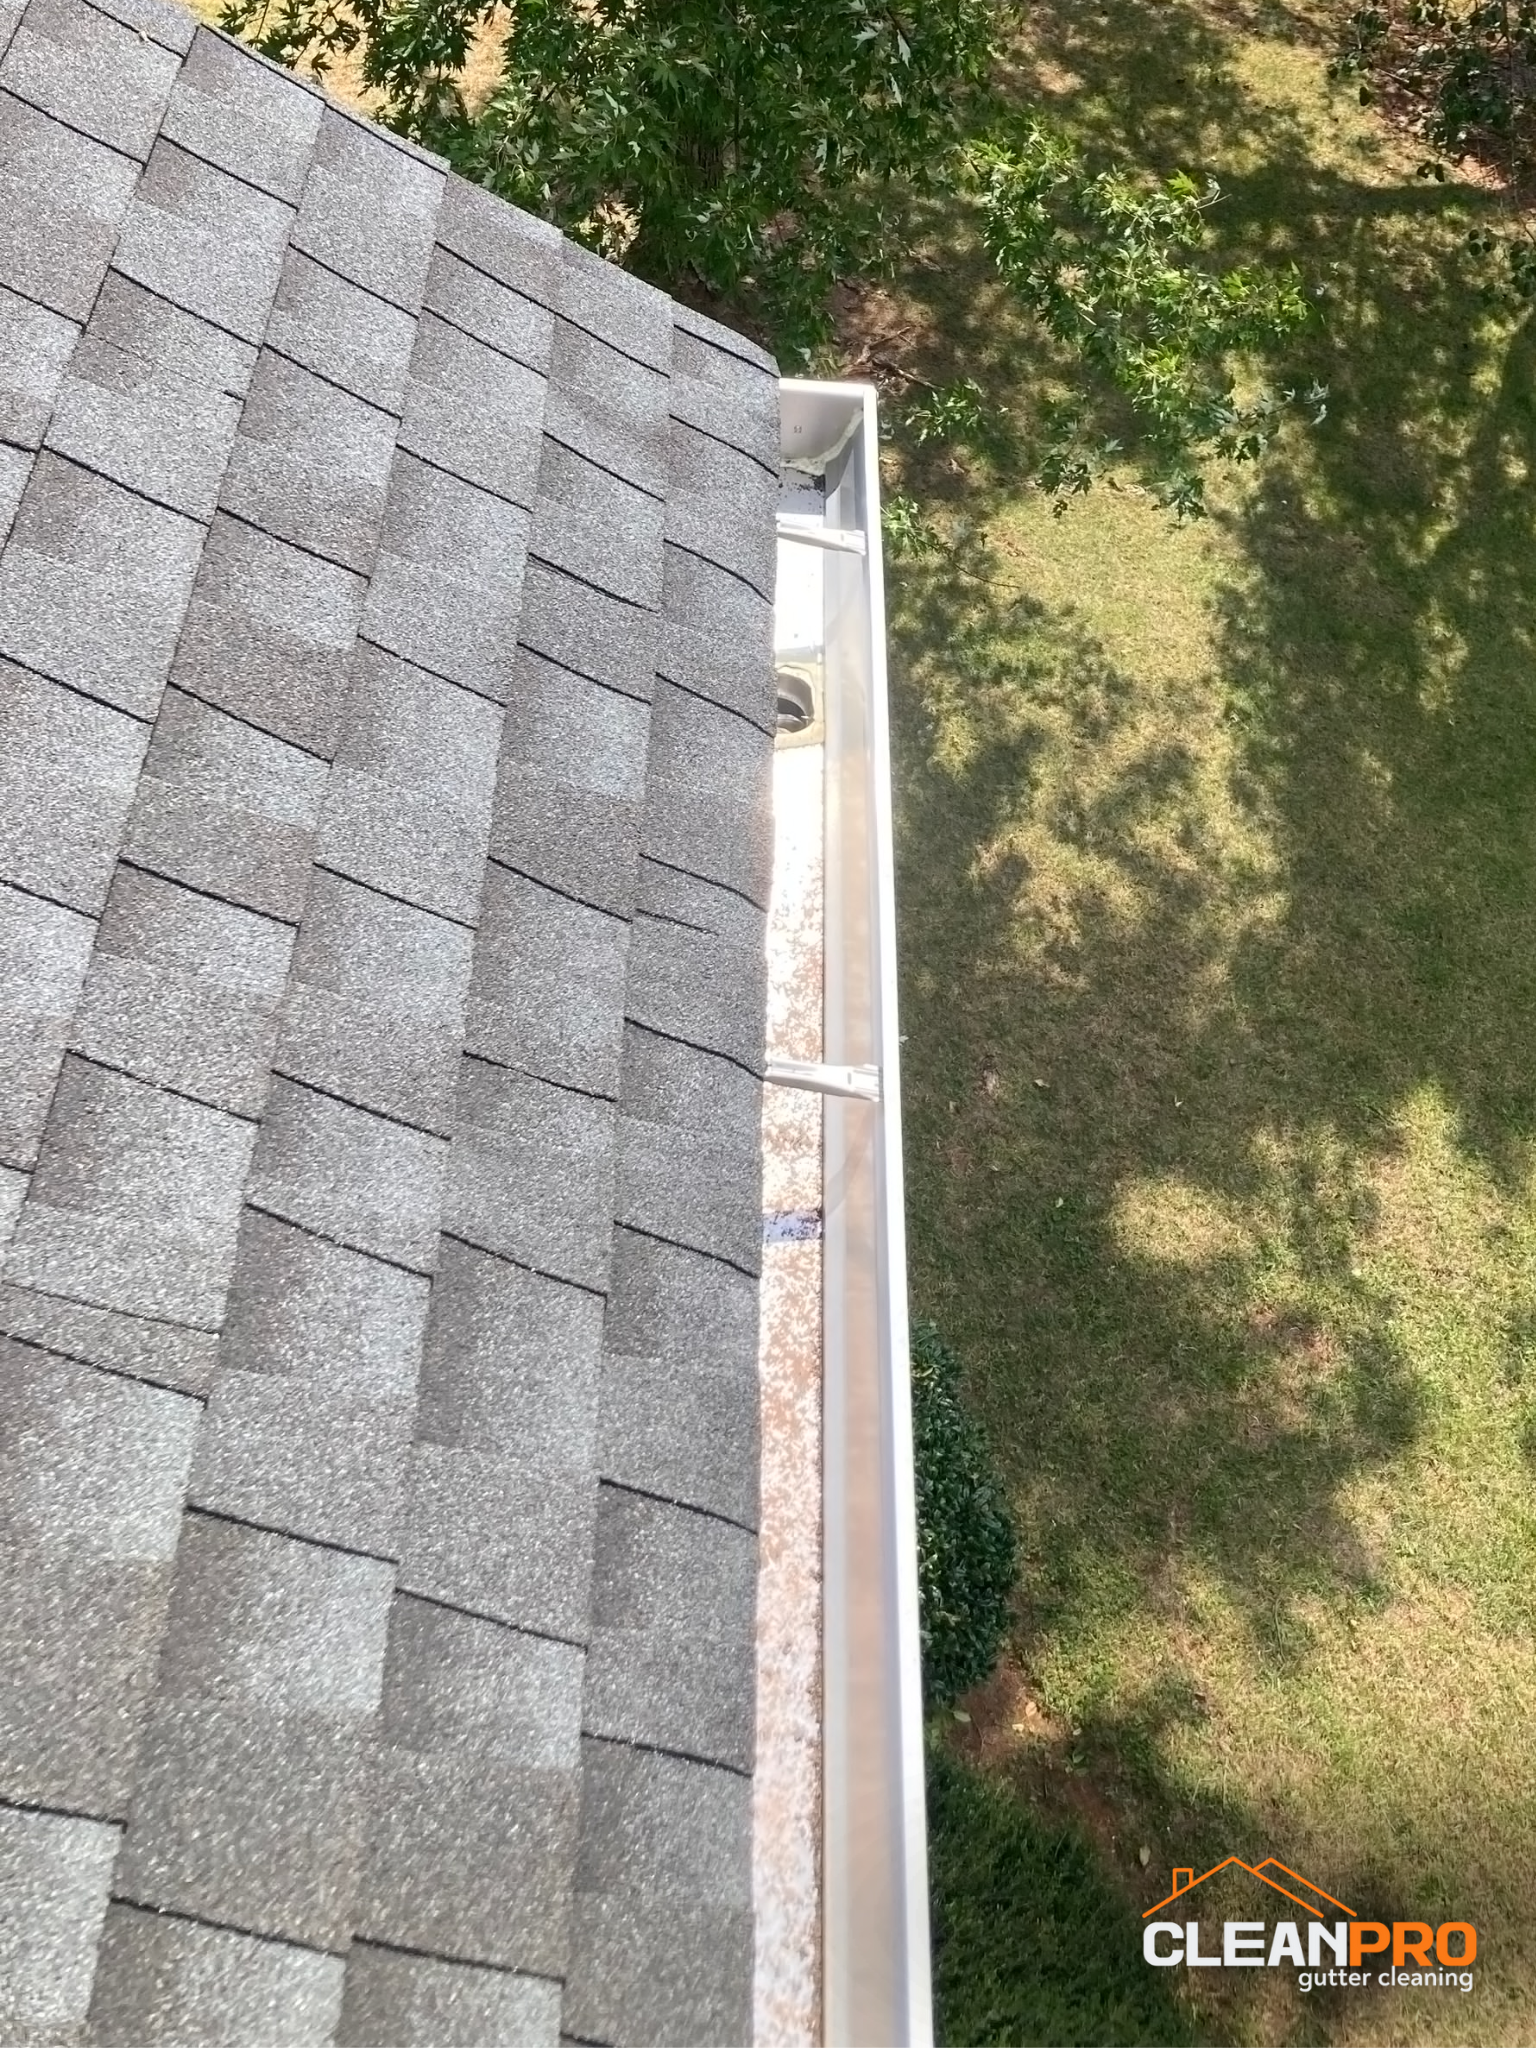 Local Gutter Cleaning in Detroit